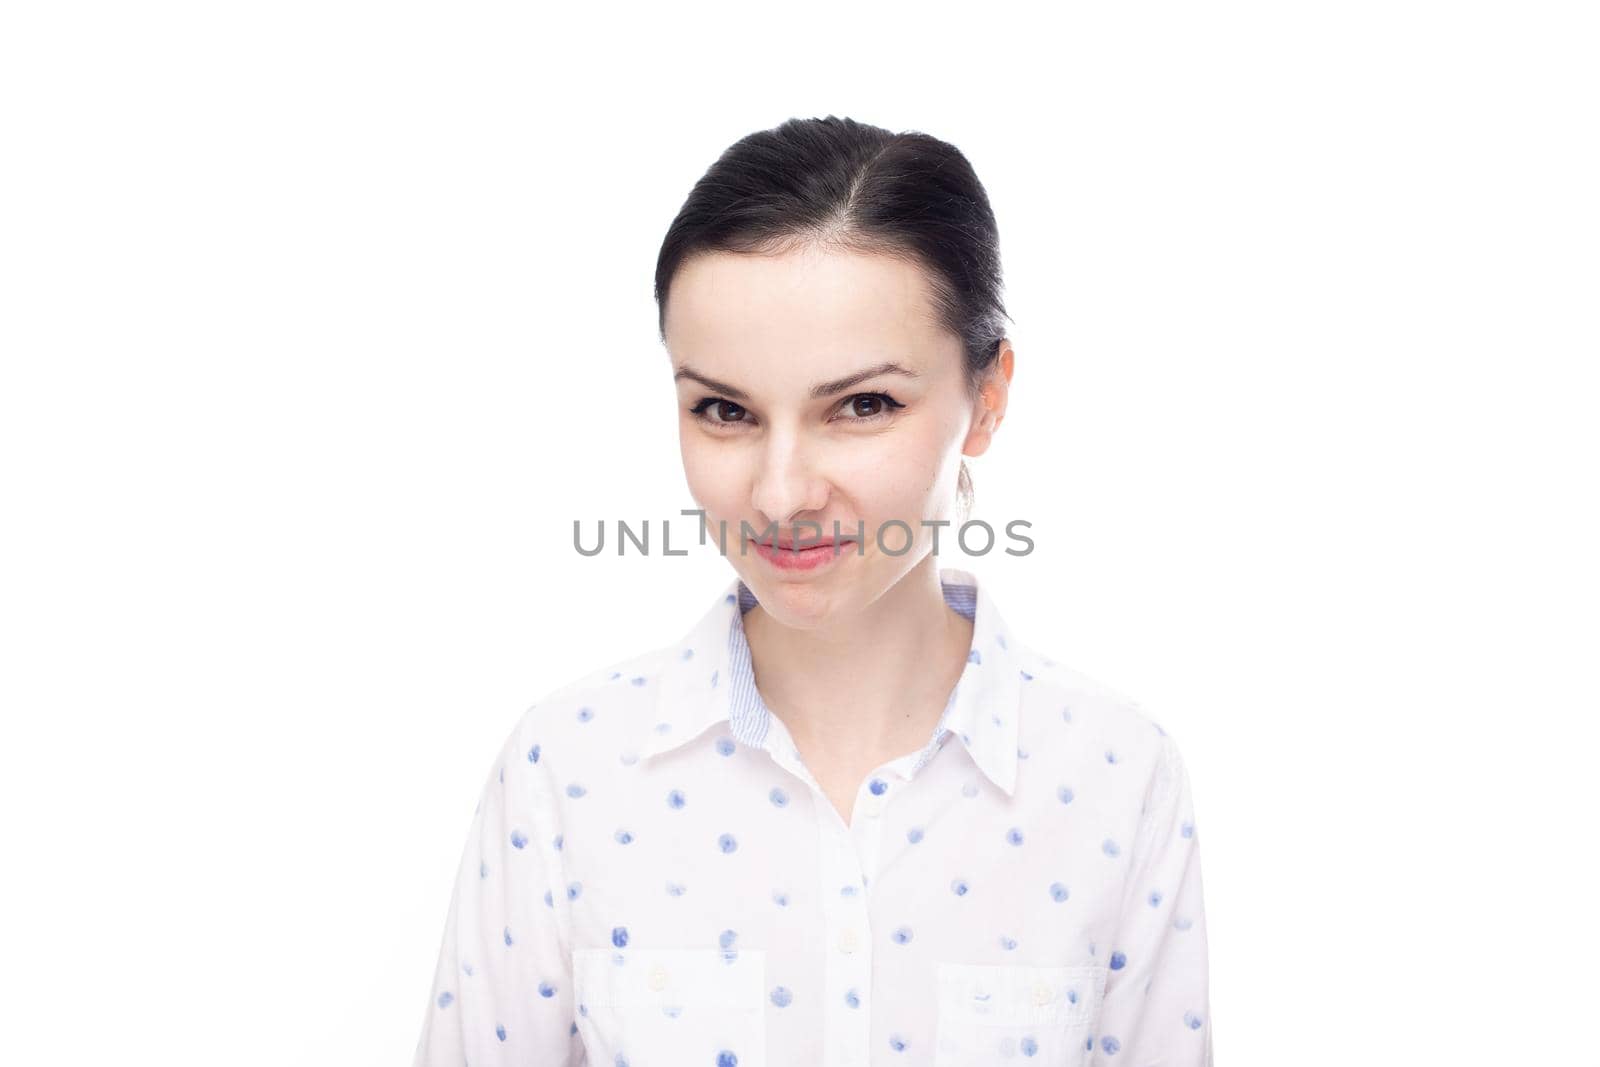 a woman in a white shirt with blue polka dots smiles mysteriously, white background by shilovskaya